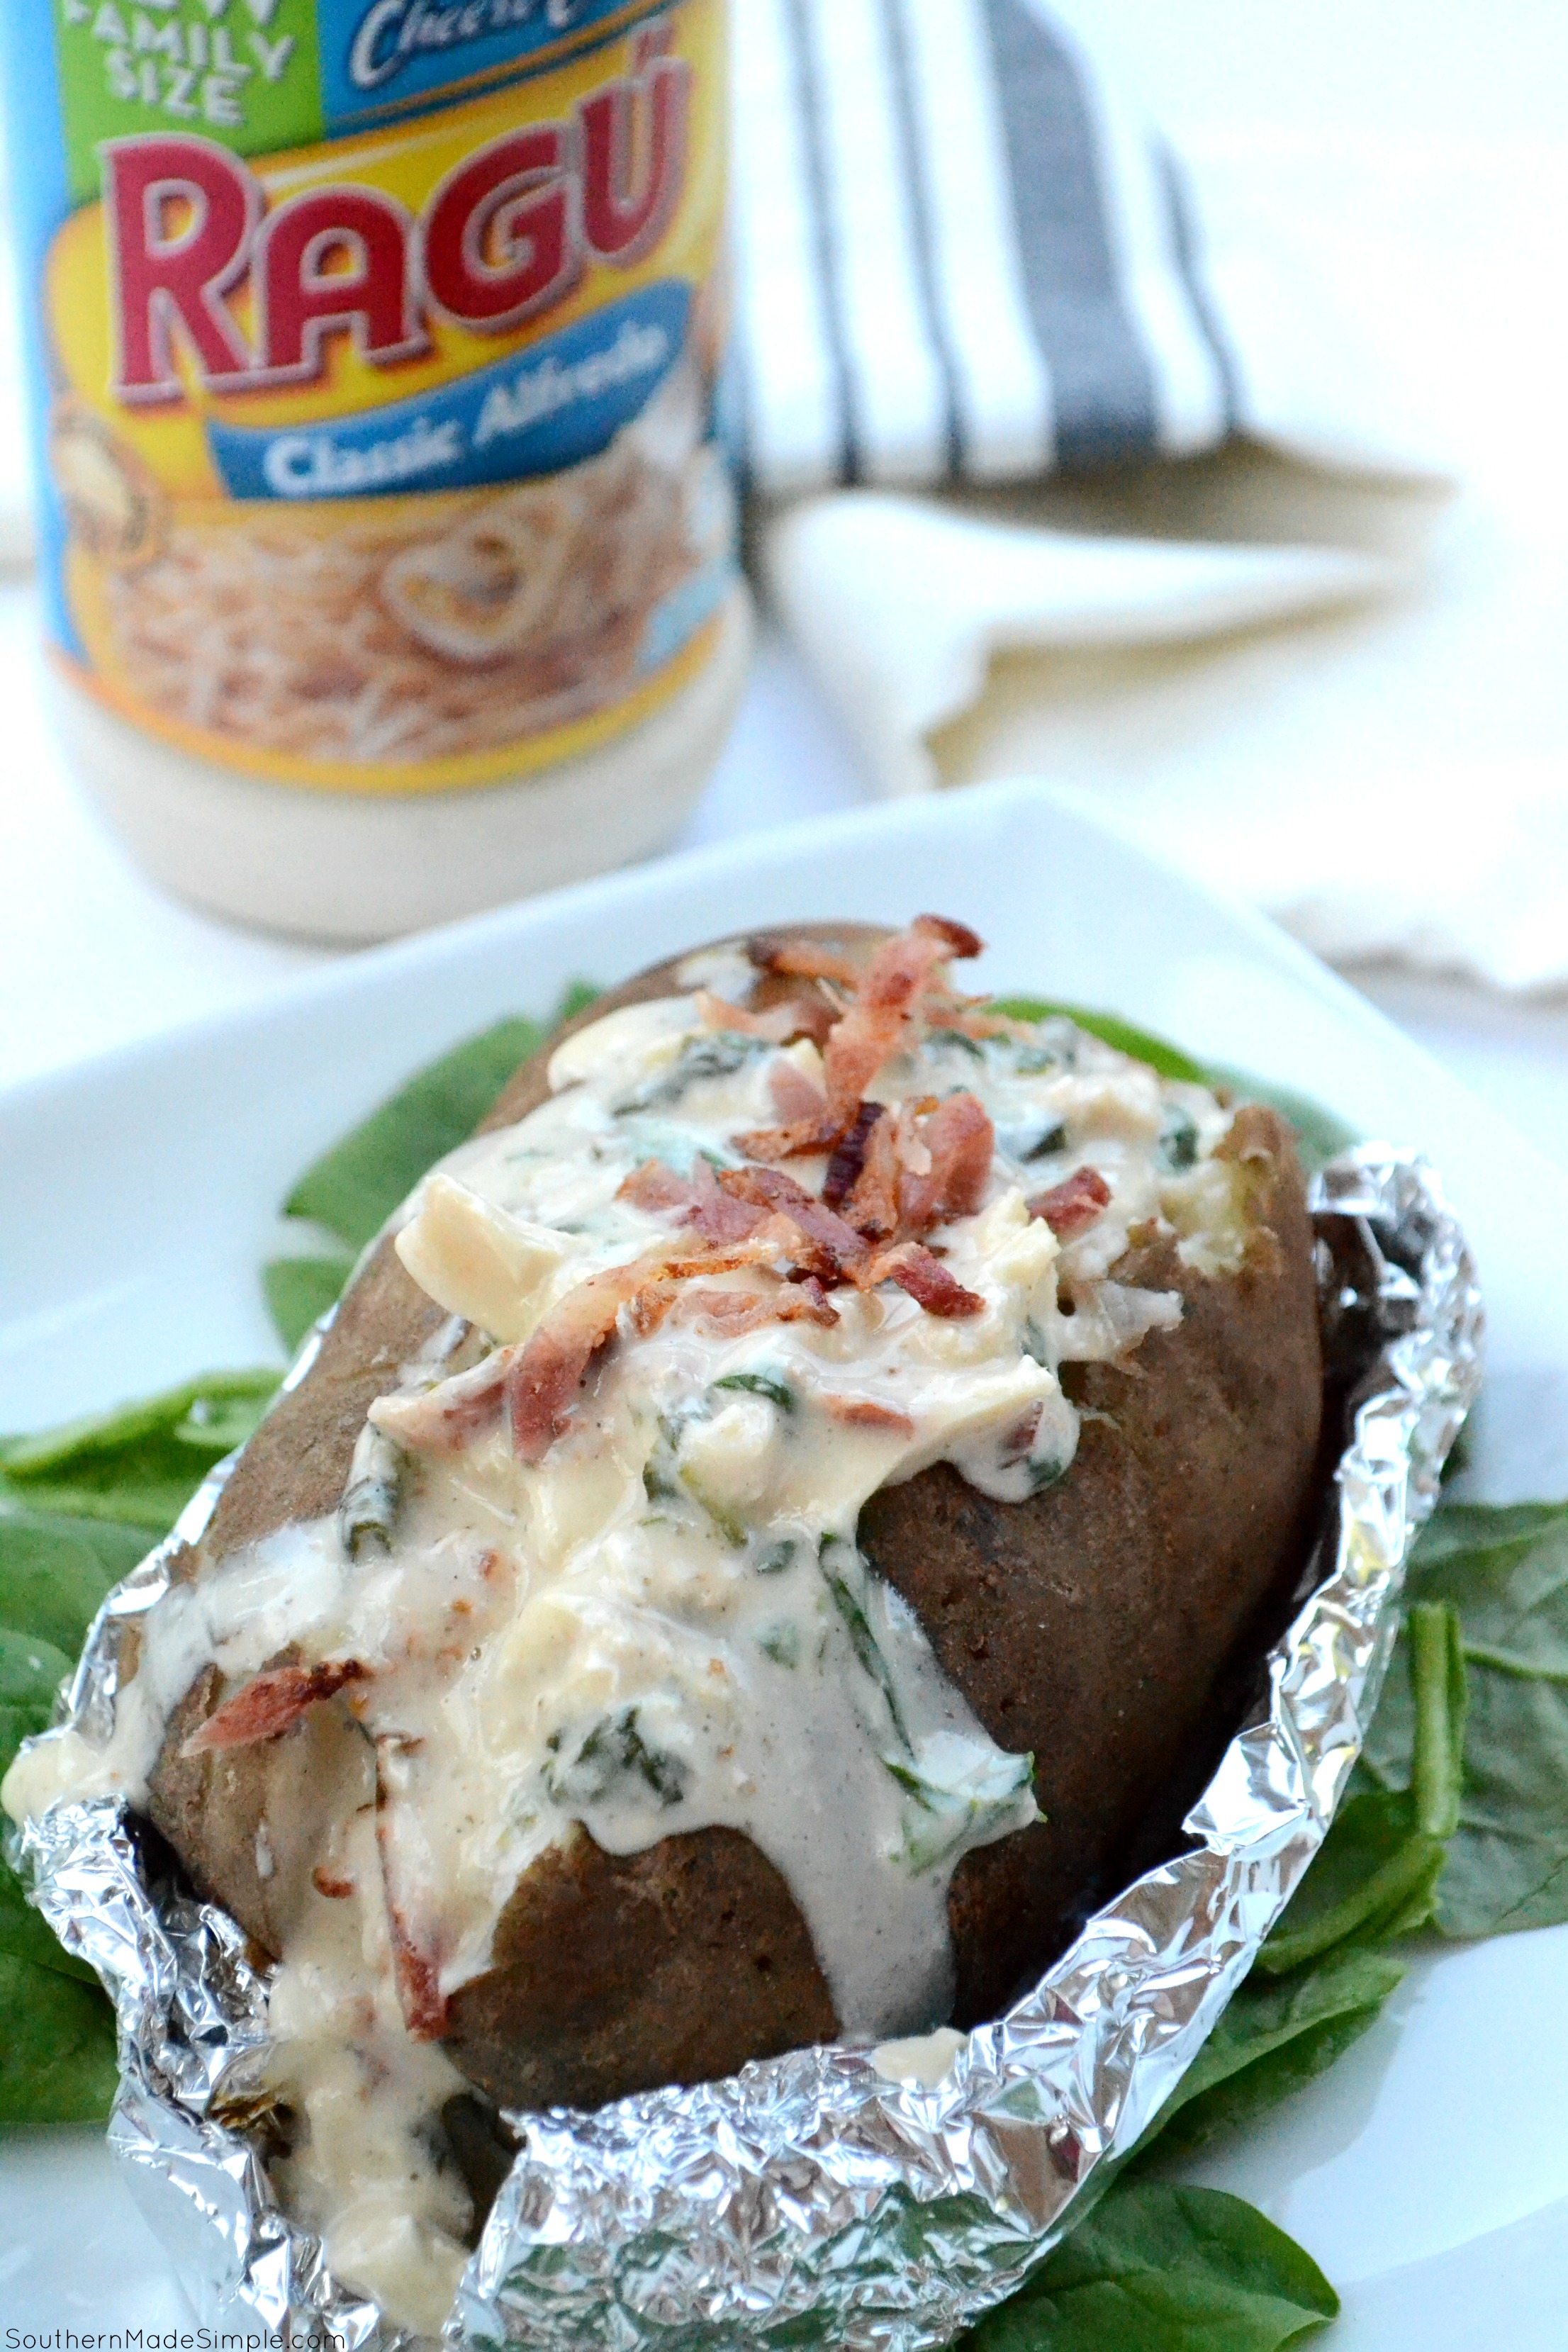 There's nothing better than a baked potato loaded with delicious cheesy goodness, and these Cheesy Chicken & Spinach Alfredo Baked Potatoes are overflowing with the the creamiest alfredo sauce made by Ragu that will make you go back for seconds!